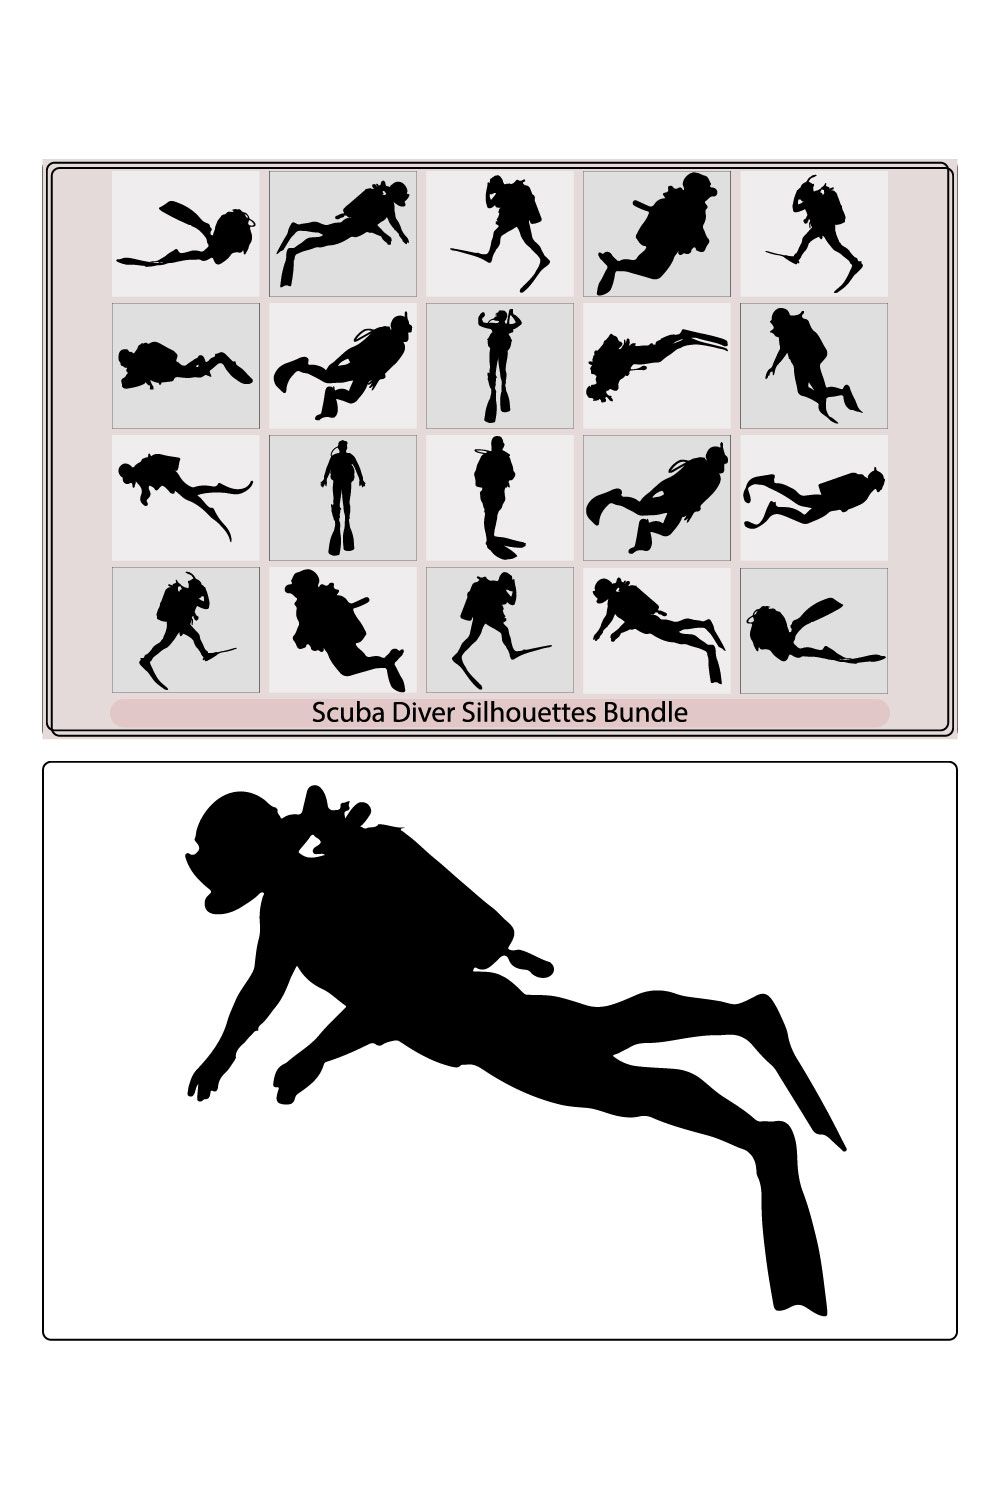 Scuba diving silhouette vector illustration isolated on white background,Black silhouette scuba divers Vector illustration,Scuba diving silhouette pinterest preview image.